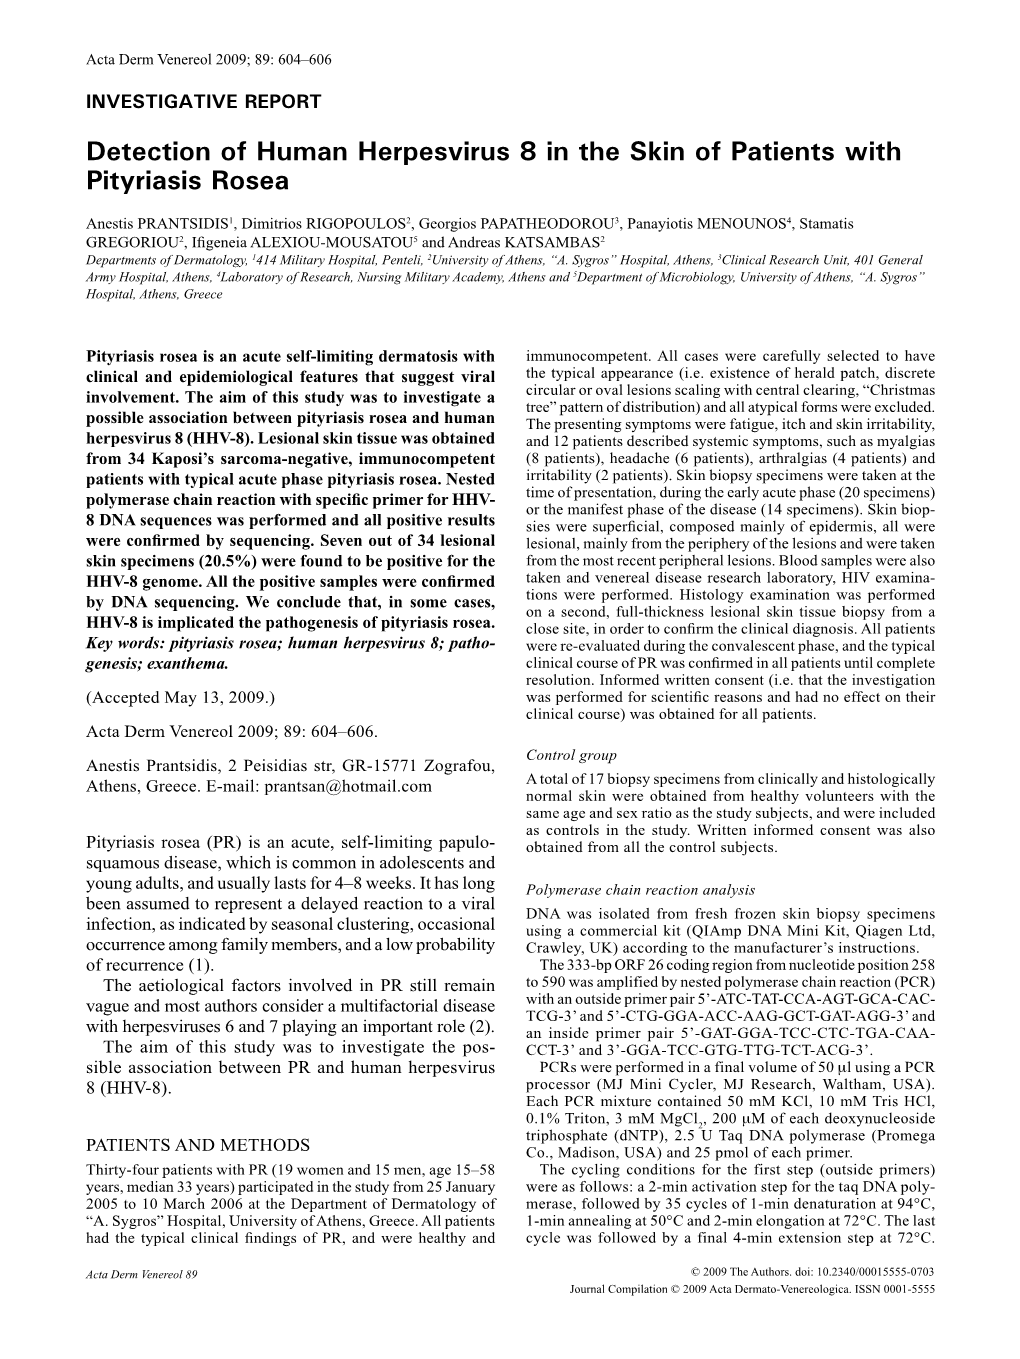 Detection of Human Herpesvirus 8 in the Skin of Patients with Pityriasis Rosea